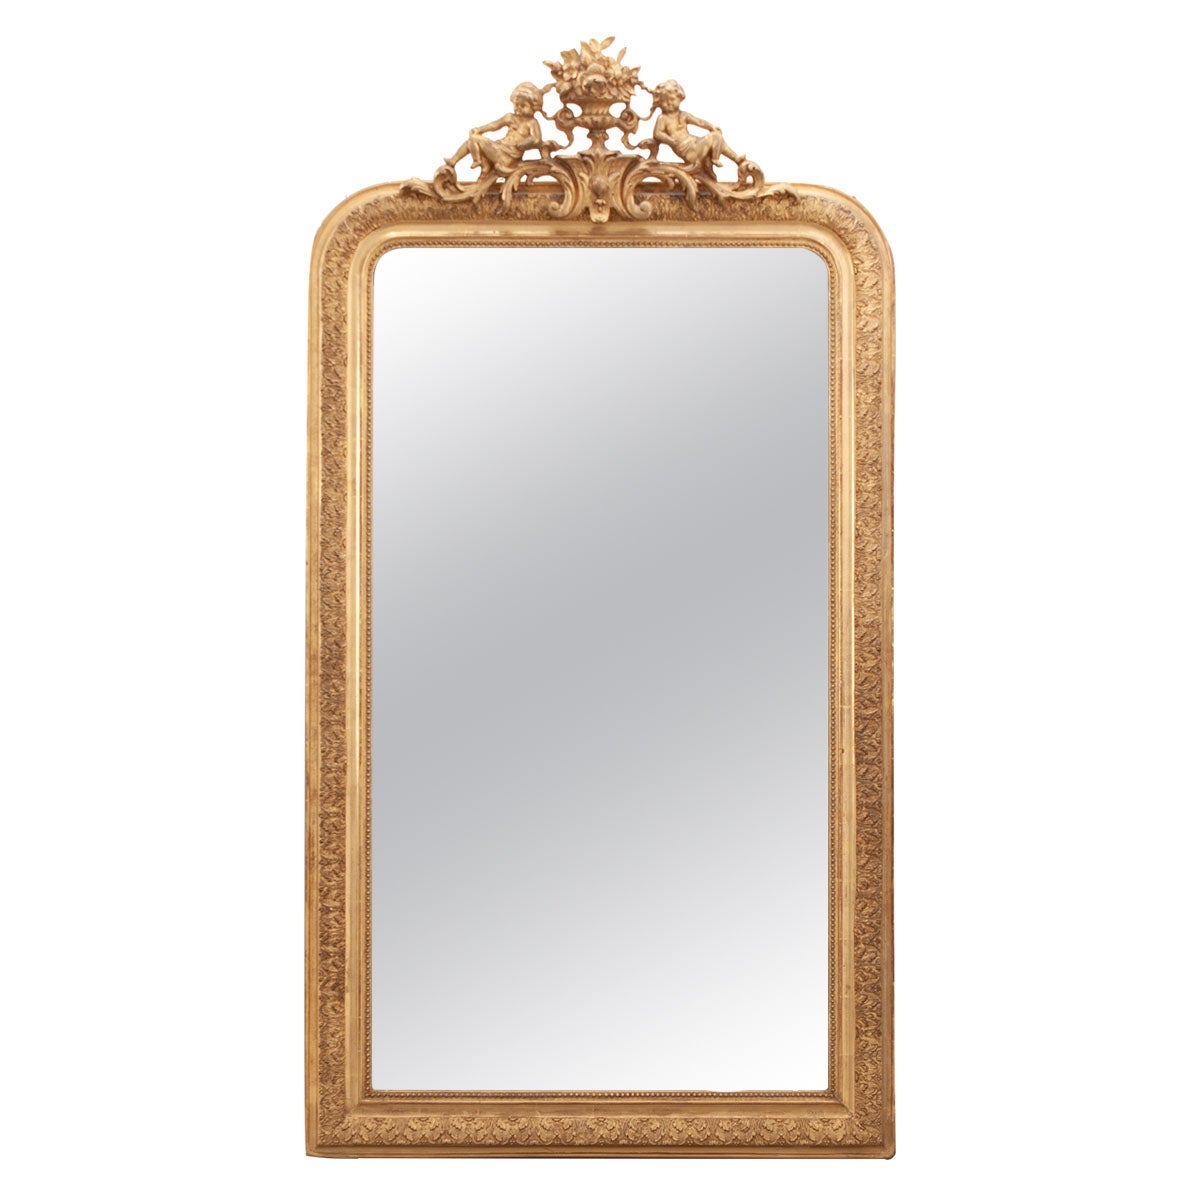 French 19th Century Gold Gilt Mirror with Crest